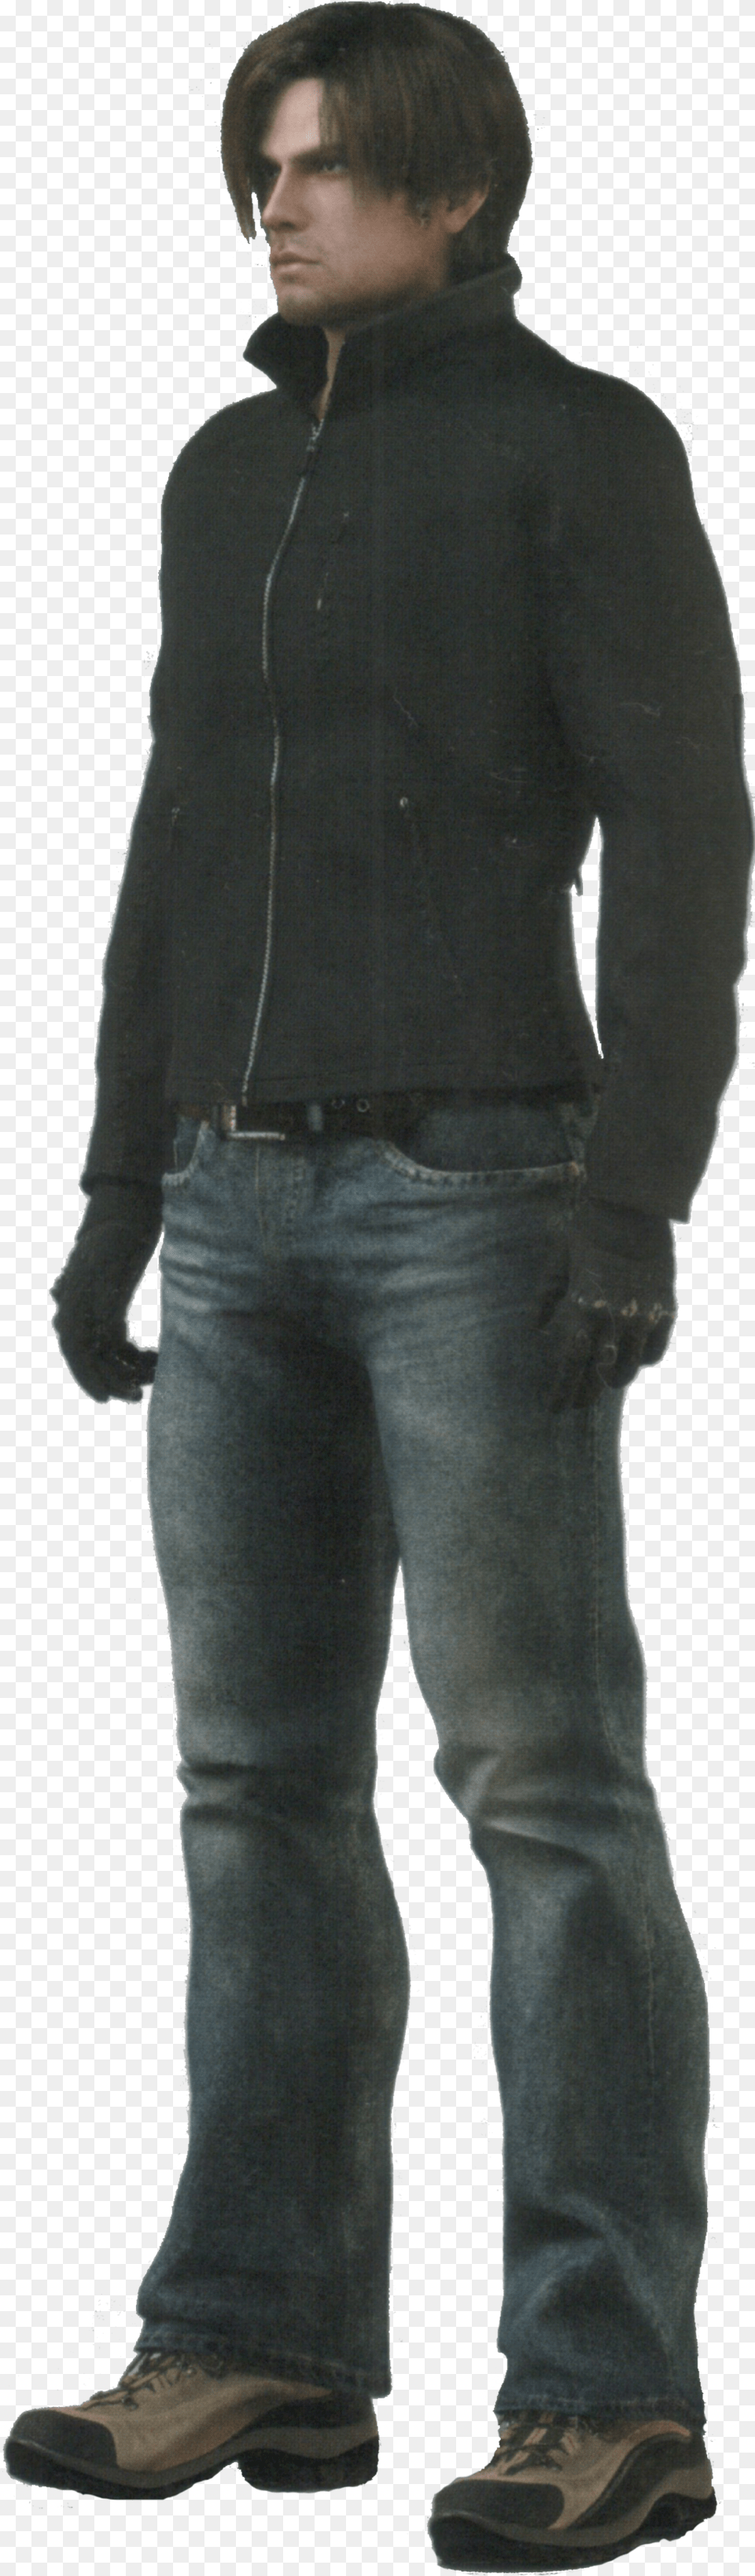 Leon S Kennedy Damnation Leon S Kennedy, Long Sleeve, Jeans, Jacket, Pants Png Image